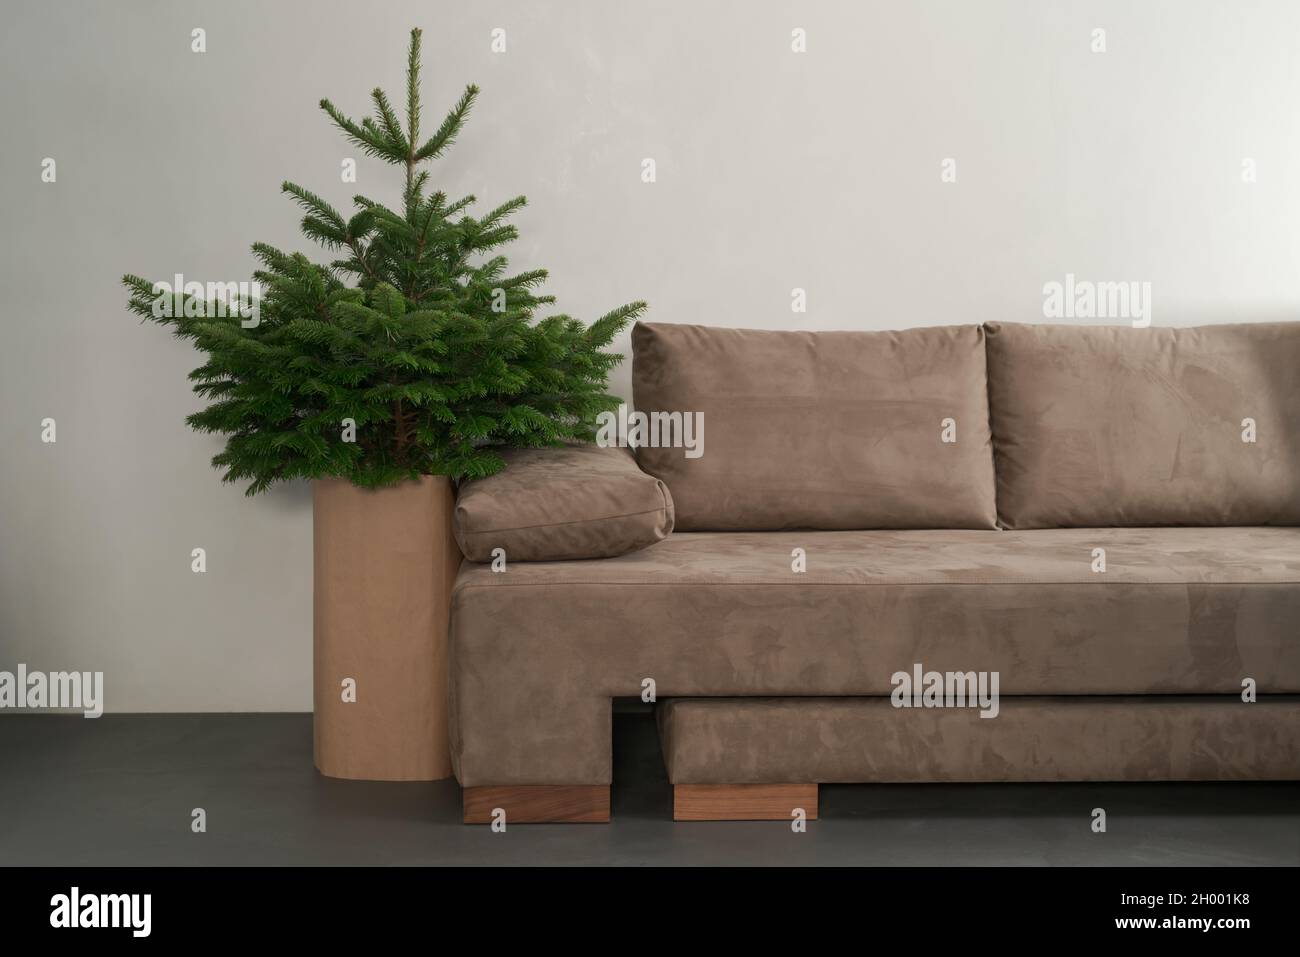 Small christmas tree indoor near couch, shallow focus Stock Photo